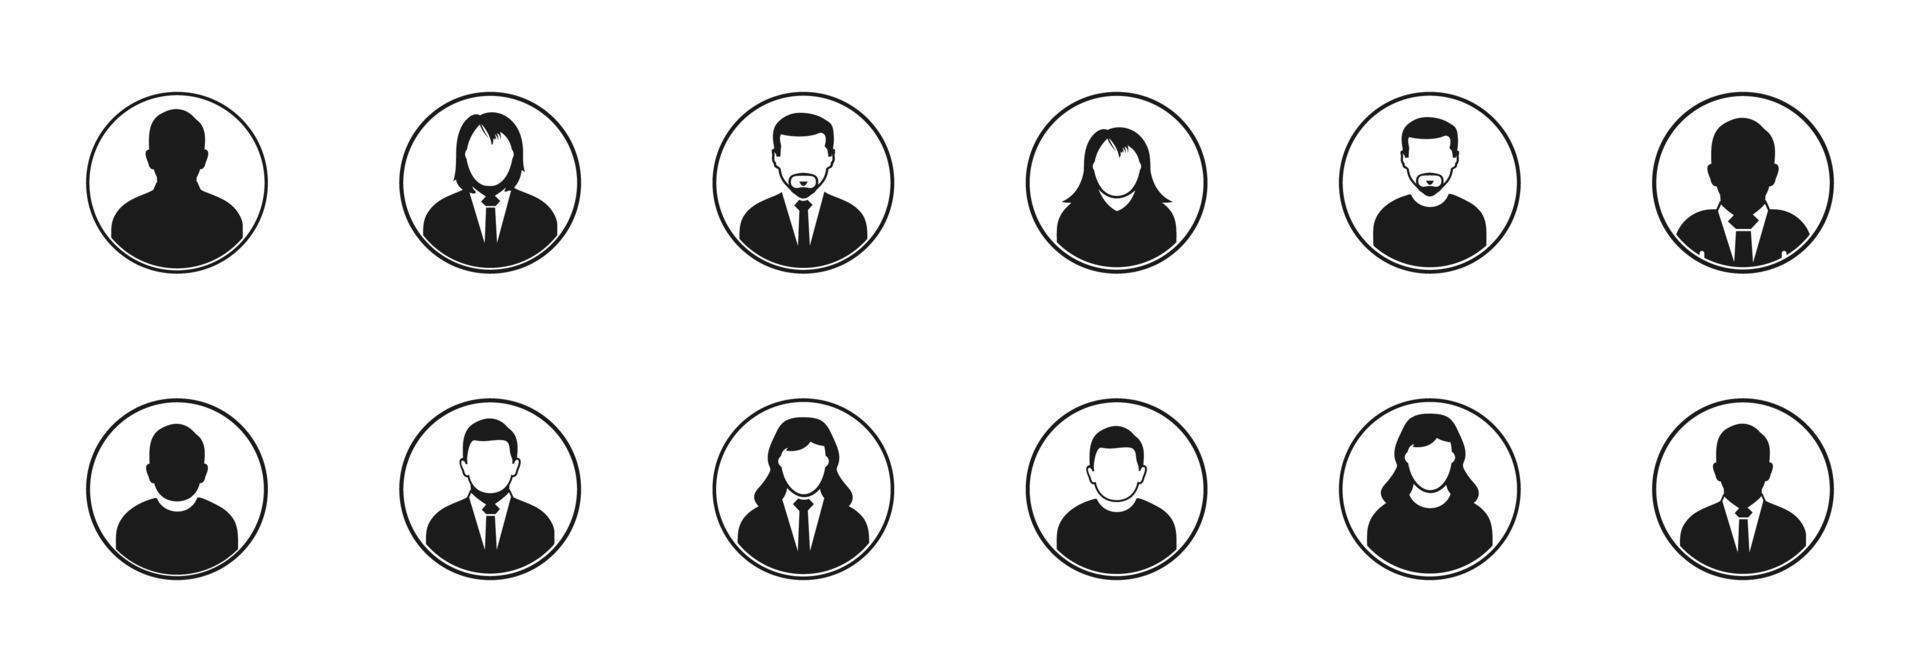 User Profile Icon Set. Collection of Person, People, Man, Women, Male, Female, Boy, Girl, Businessman and Avatar Icons. Editable Vector Symbol Illustration.